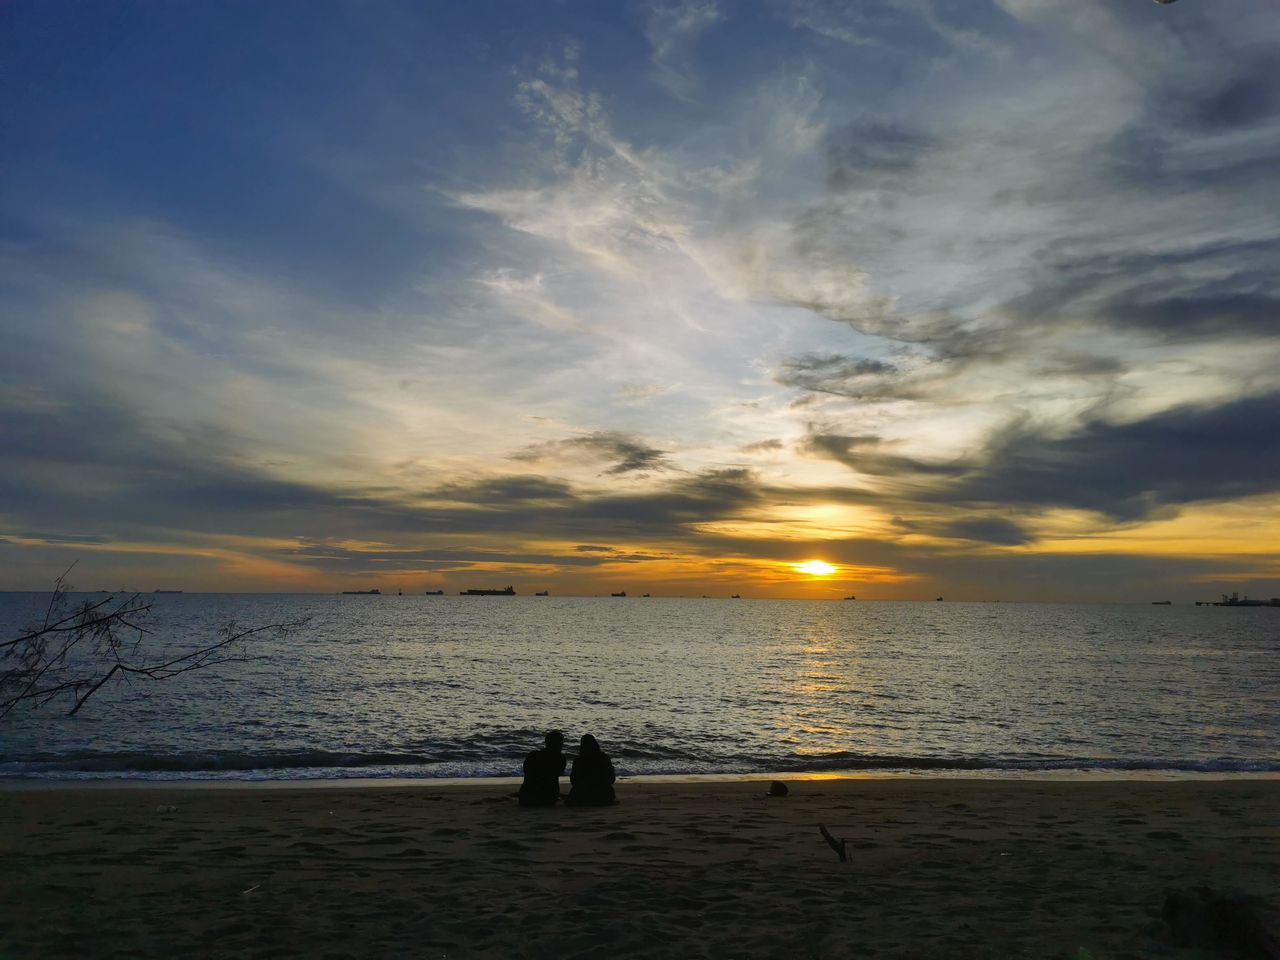 sky, water, sea, beach, horizon, cloud, sunset, land, ocean, beauty in nature, scenics - nature, nature, sunlight, shore, horizon over water, sun, dusk, tranquility, body of water, coast, tranquil scene, evening, wave, sand, holiday, afterglow, two people, vacation, trip, silhouette, outdoors, leisure activity, men, idyllic, travel destinations, togetherness, wind wave, reflection, travel, adult, seascape, lifestyles, relaxation